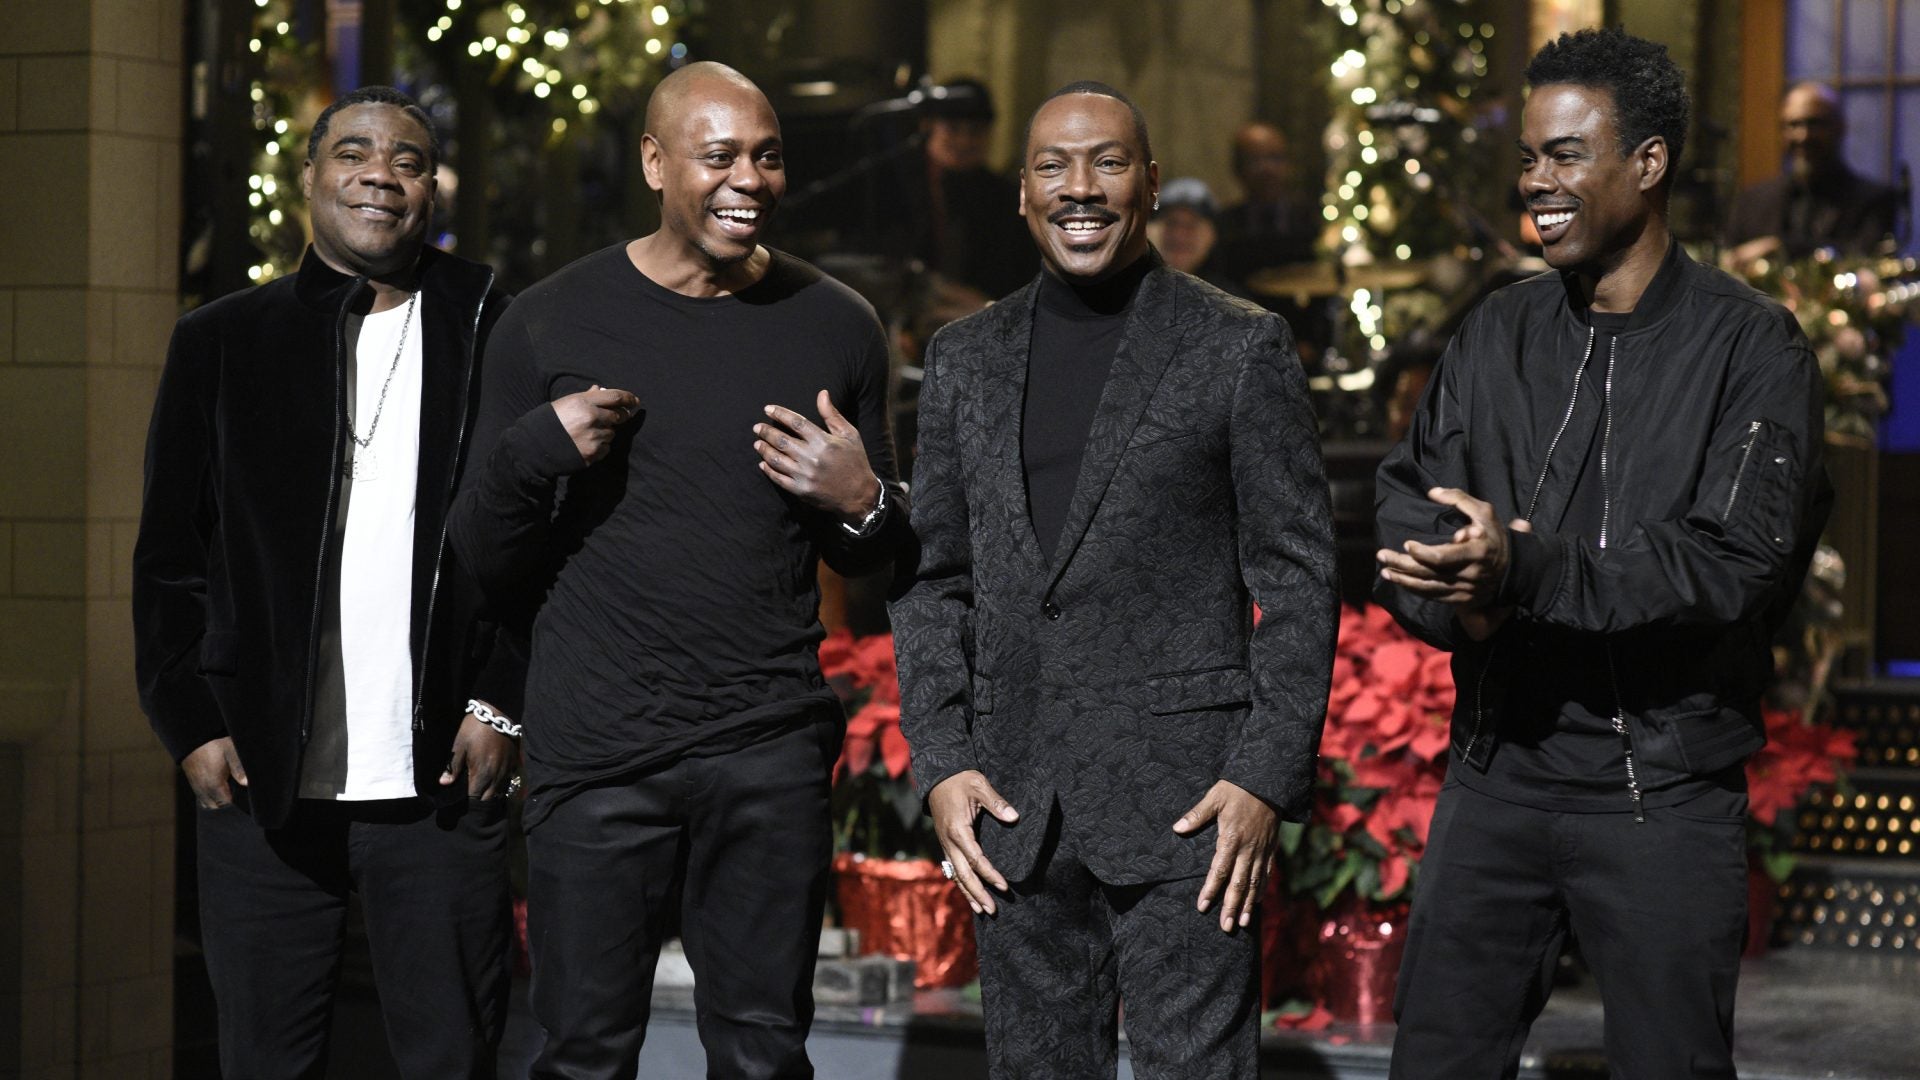 Eddie Murphy Wins His First Emmy Award For 'Saturday Night Live': 'It's Been 40 Years'